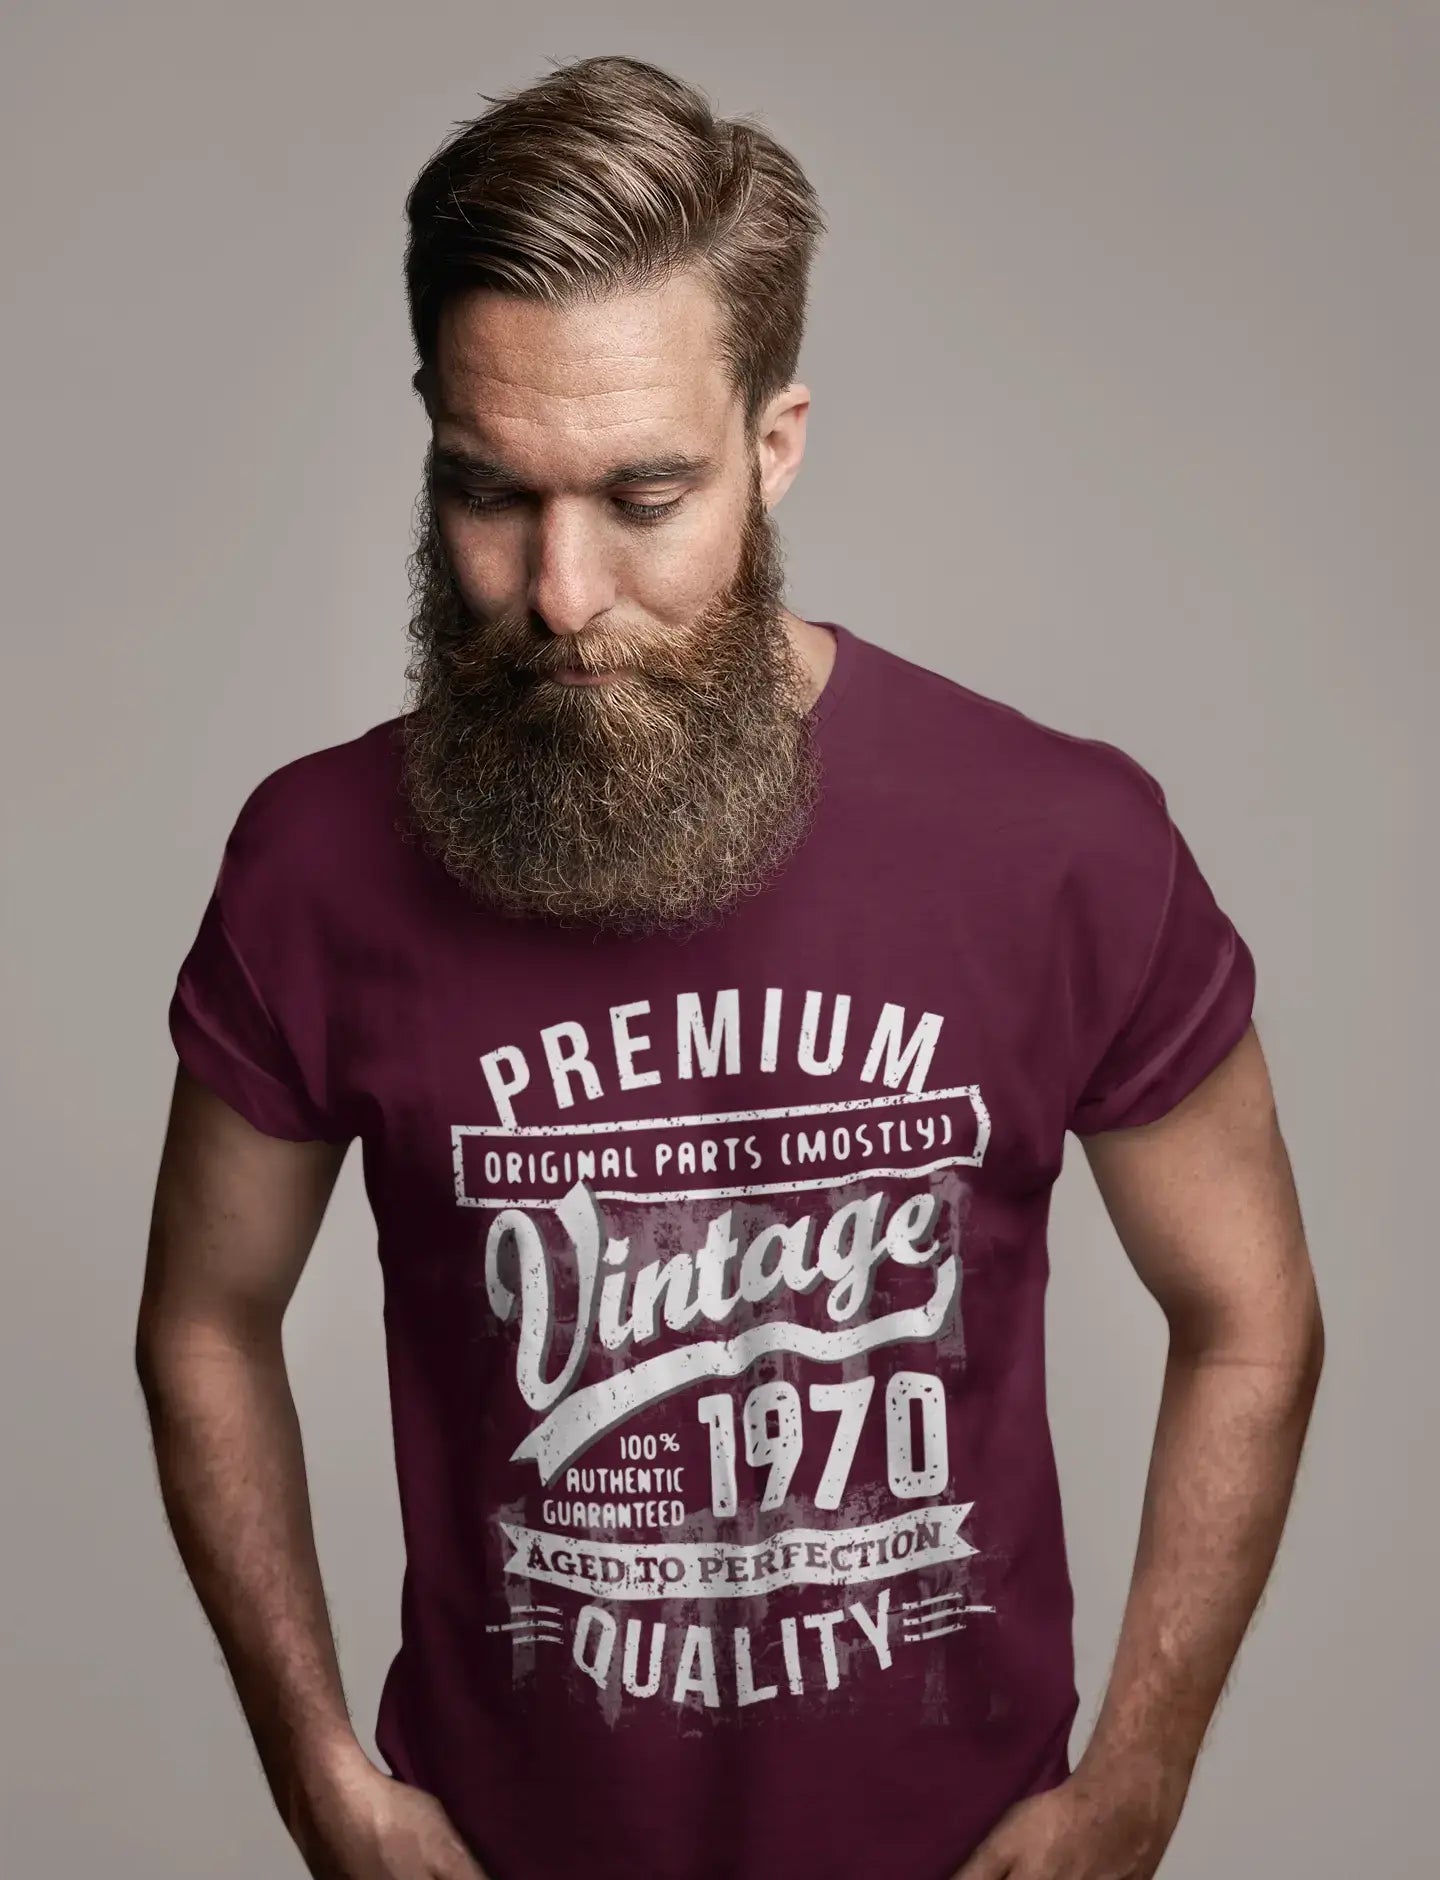 ULTRABASIC - Graphic Men's 1970 Aged to Perfection Birthday Gift T-Shirt